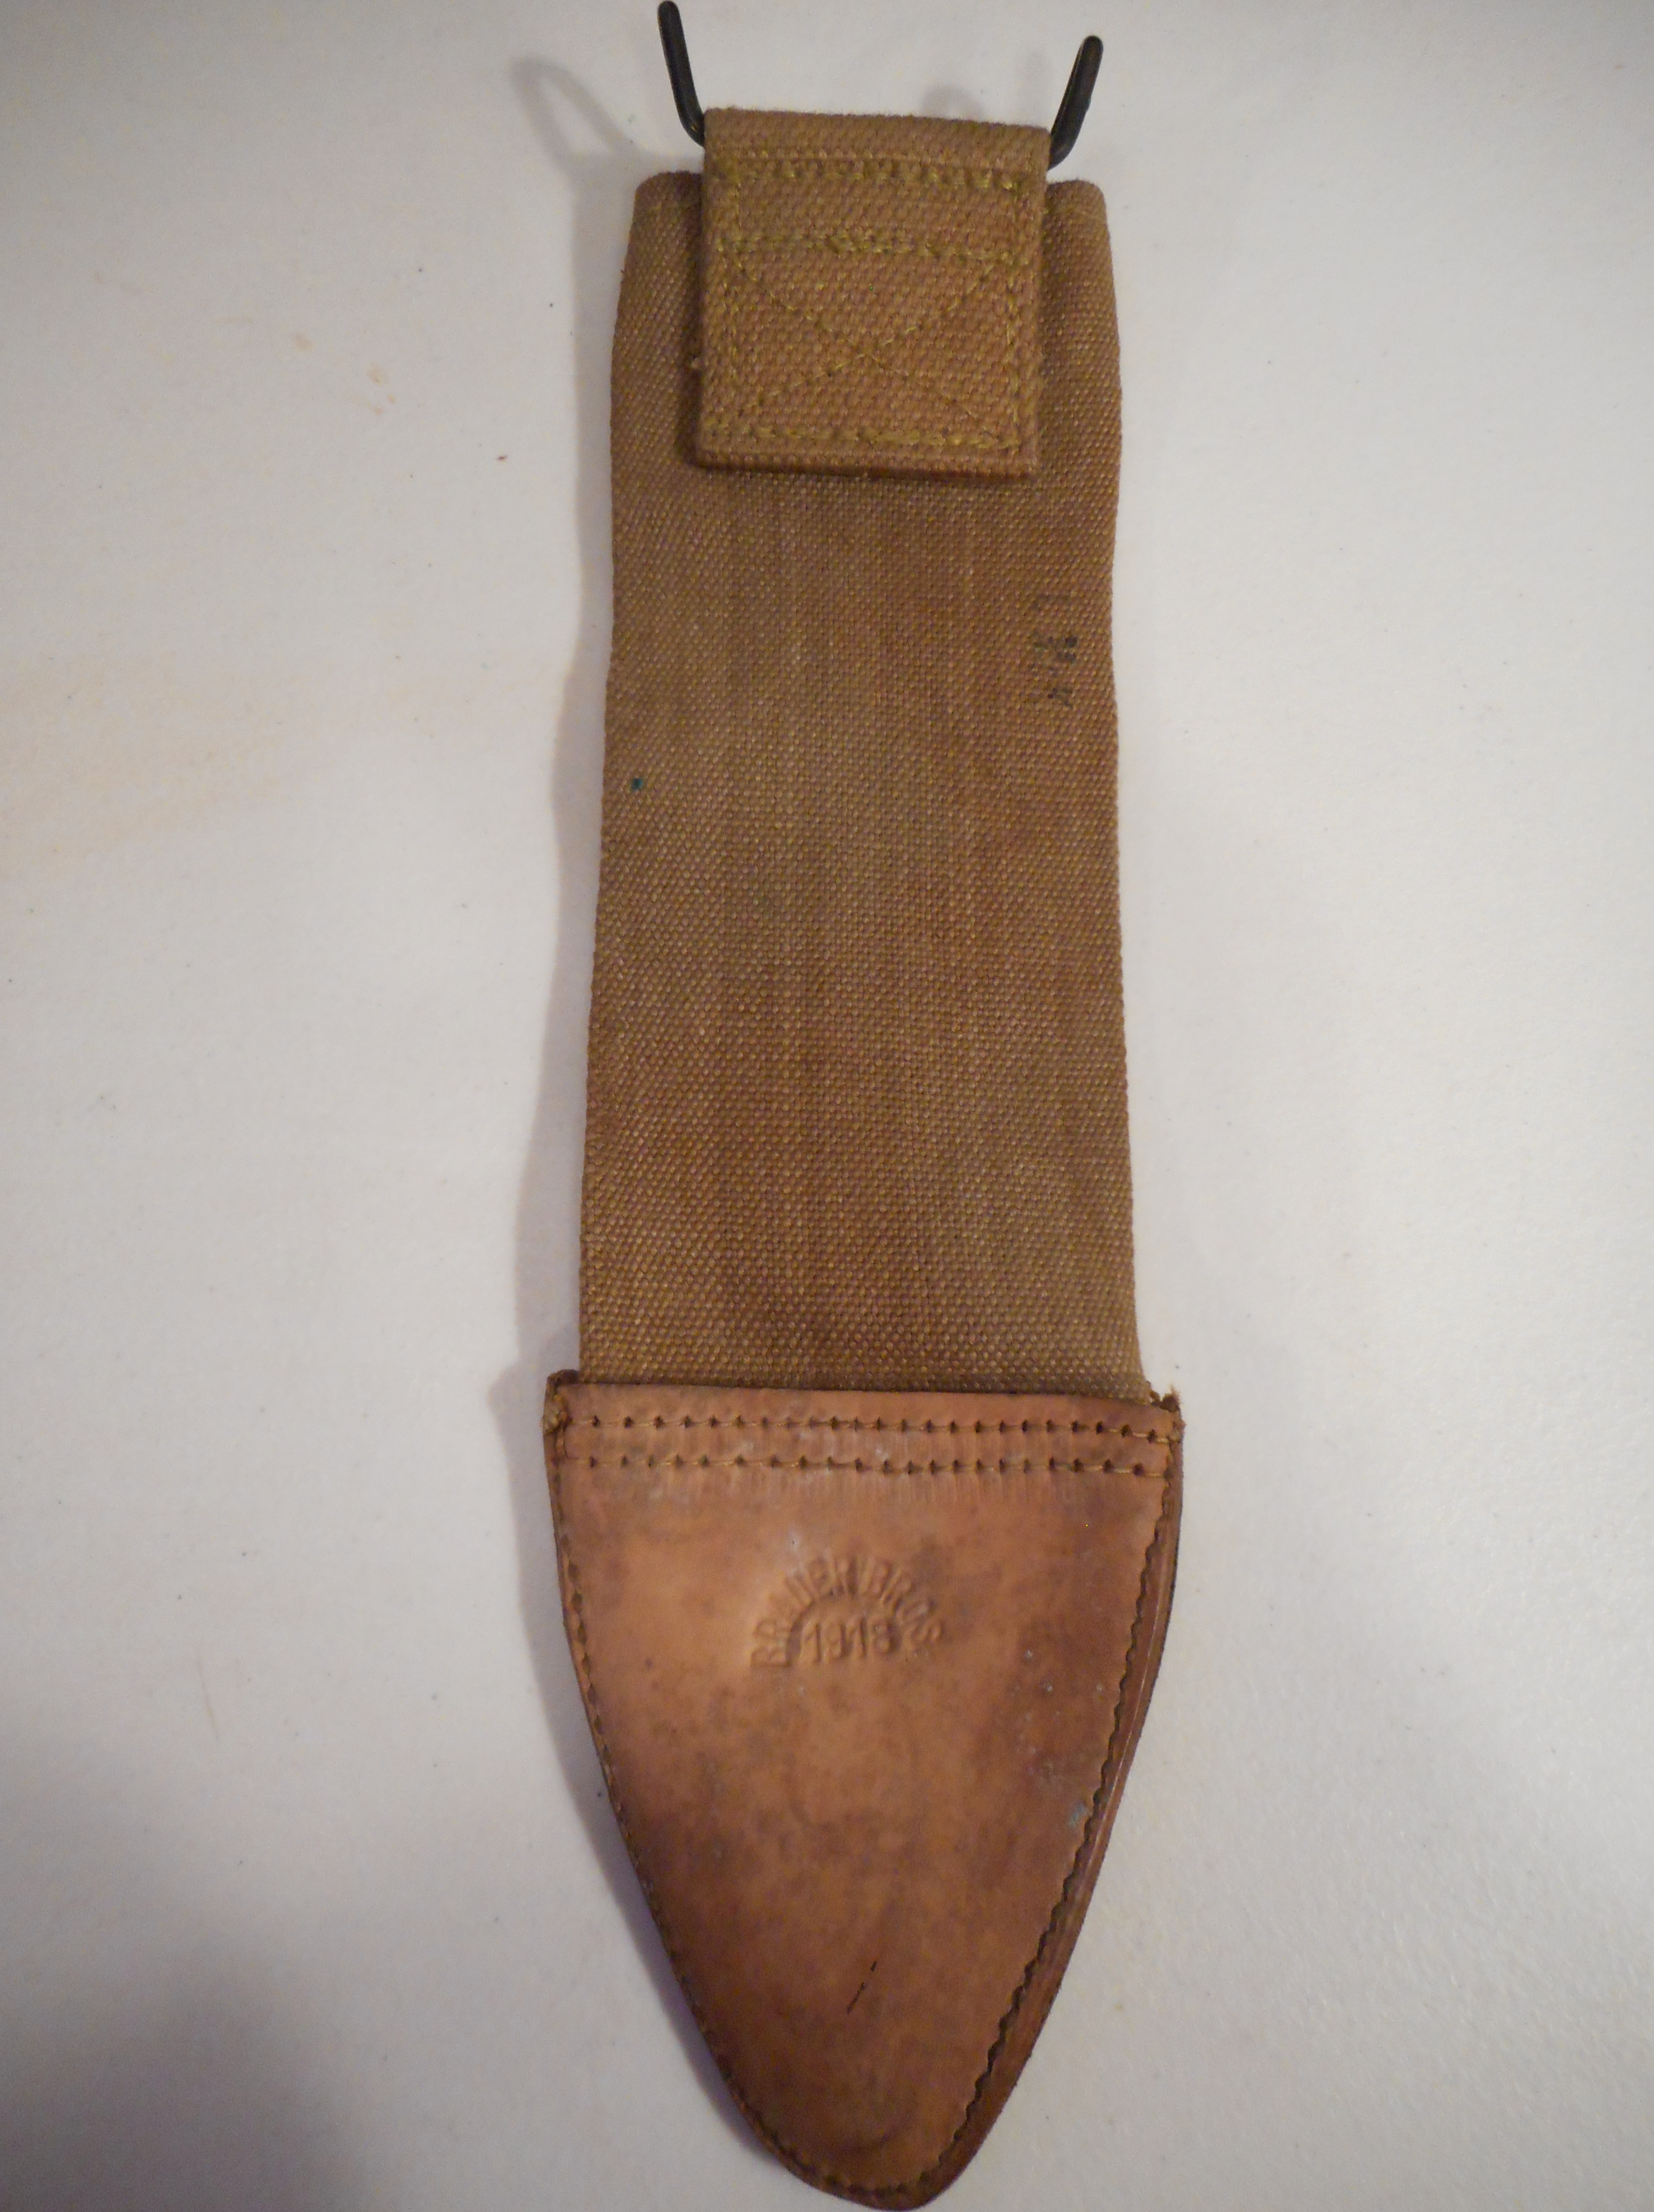 US WW1 1910 Springfield Bolo/Trench Knife CANVAS SCABBARD COVER -1917 ...